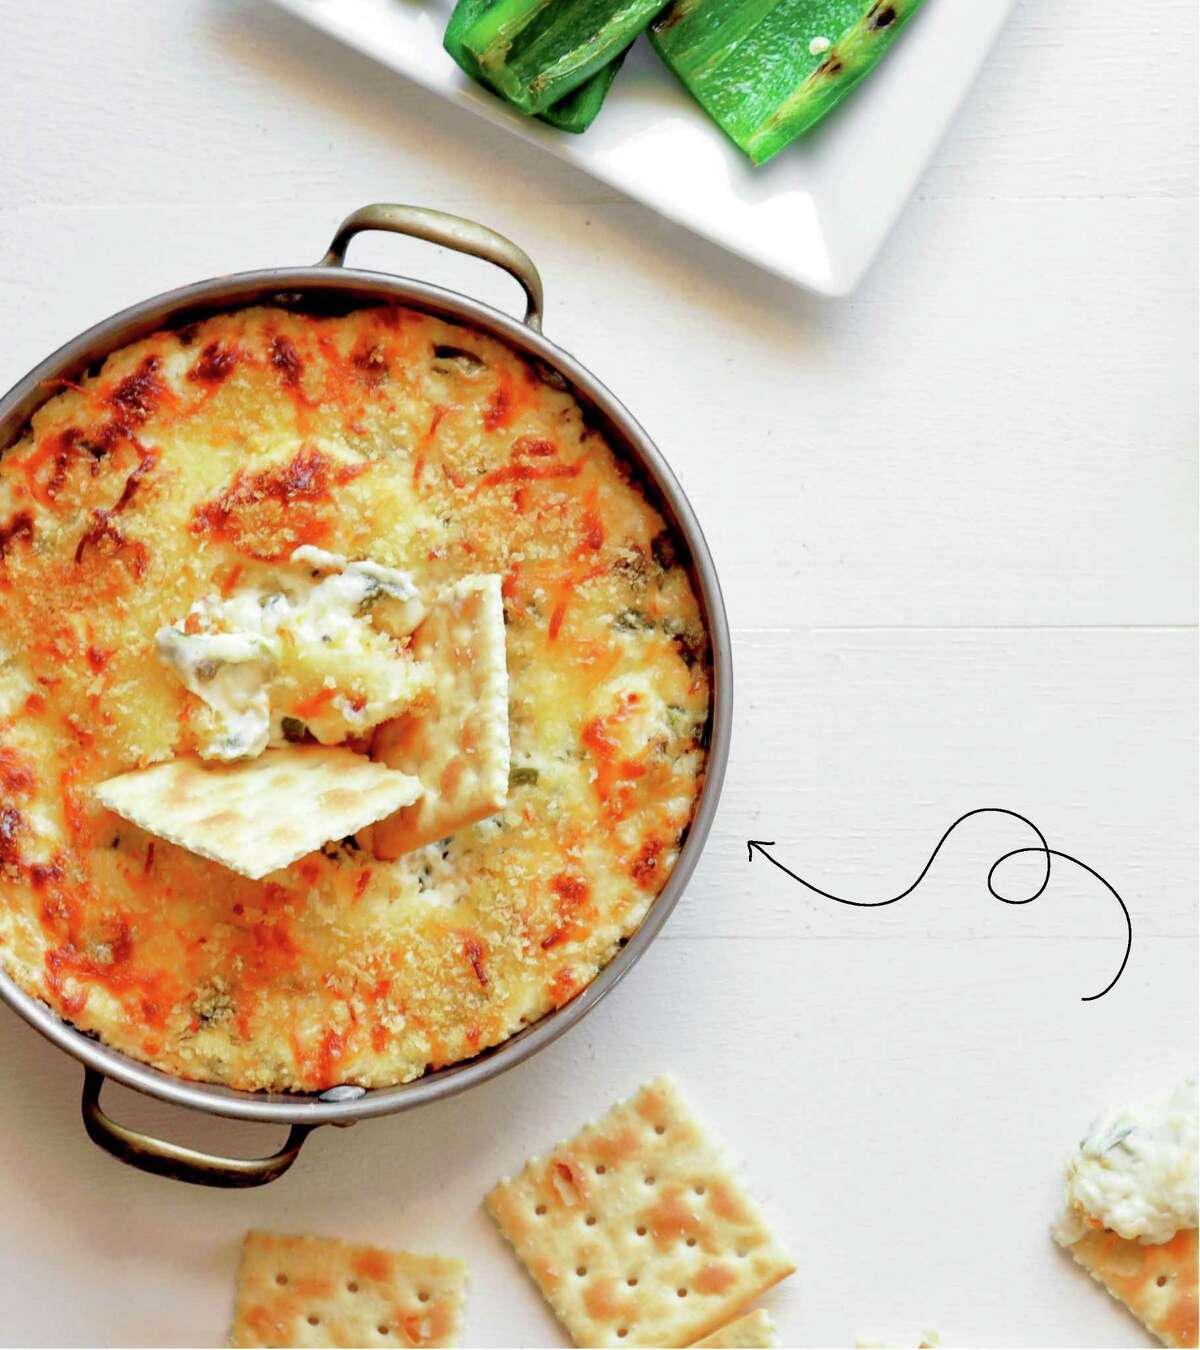 Jalapeno popper dip from "Upscale Downhome: Family Recipes, All Gussied Up" by Rachel Hollis.